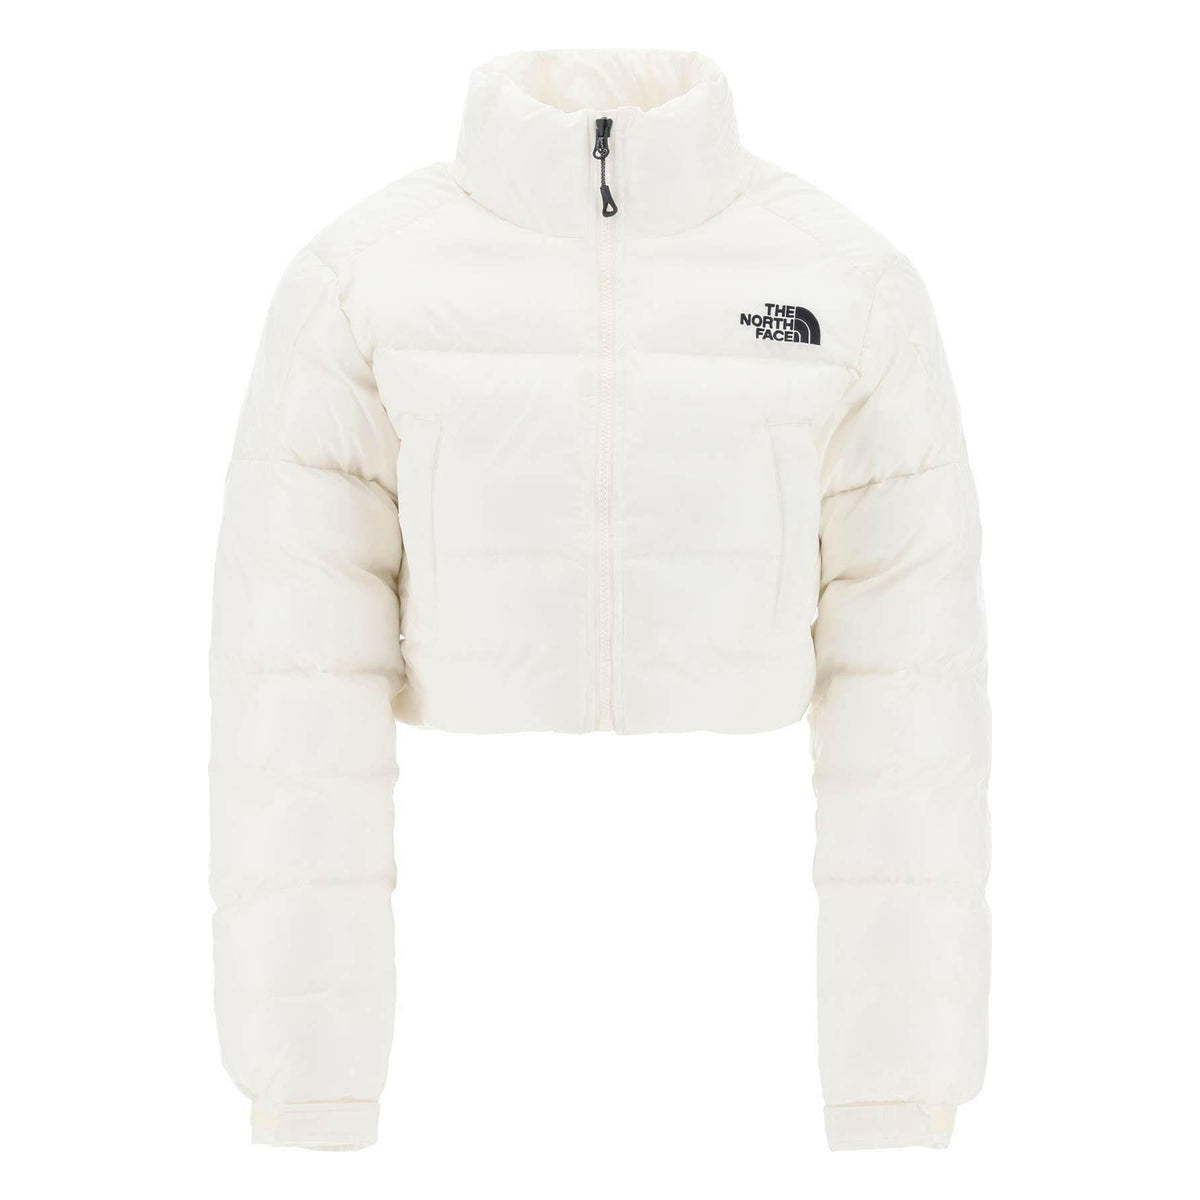 THE NORTH FACE - The North Face 'Rusta 2.0? Cropped Puffer Jacket - JOHN JULIA